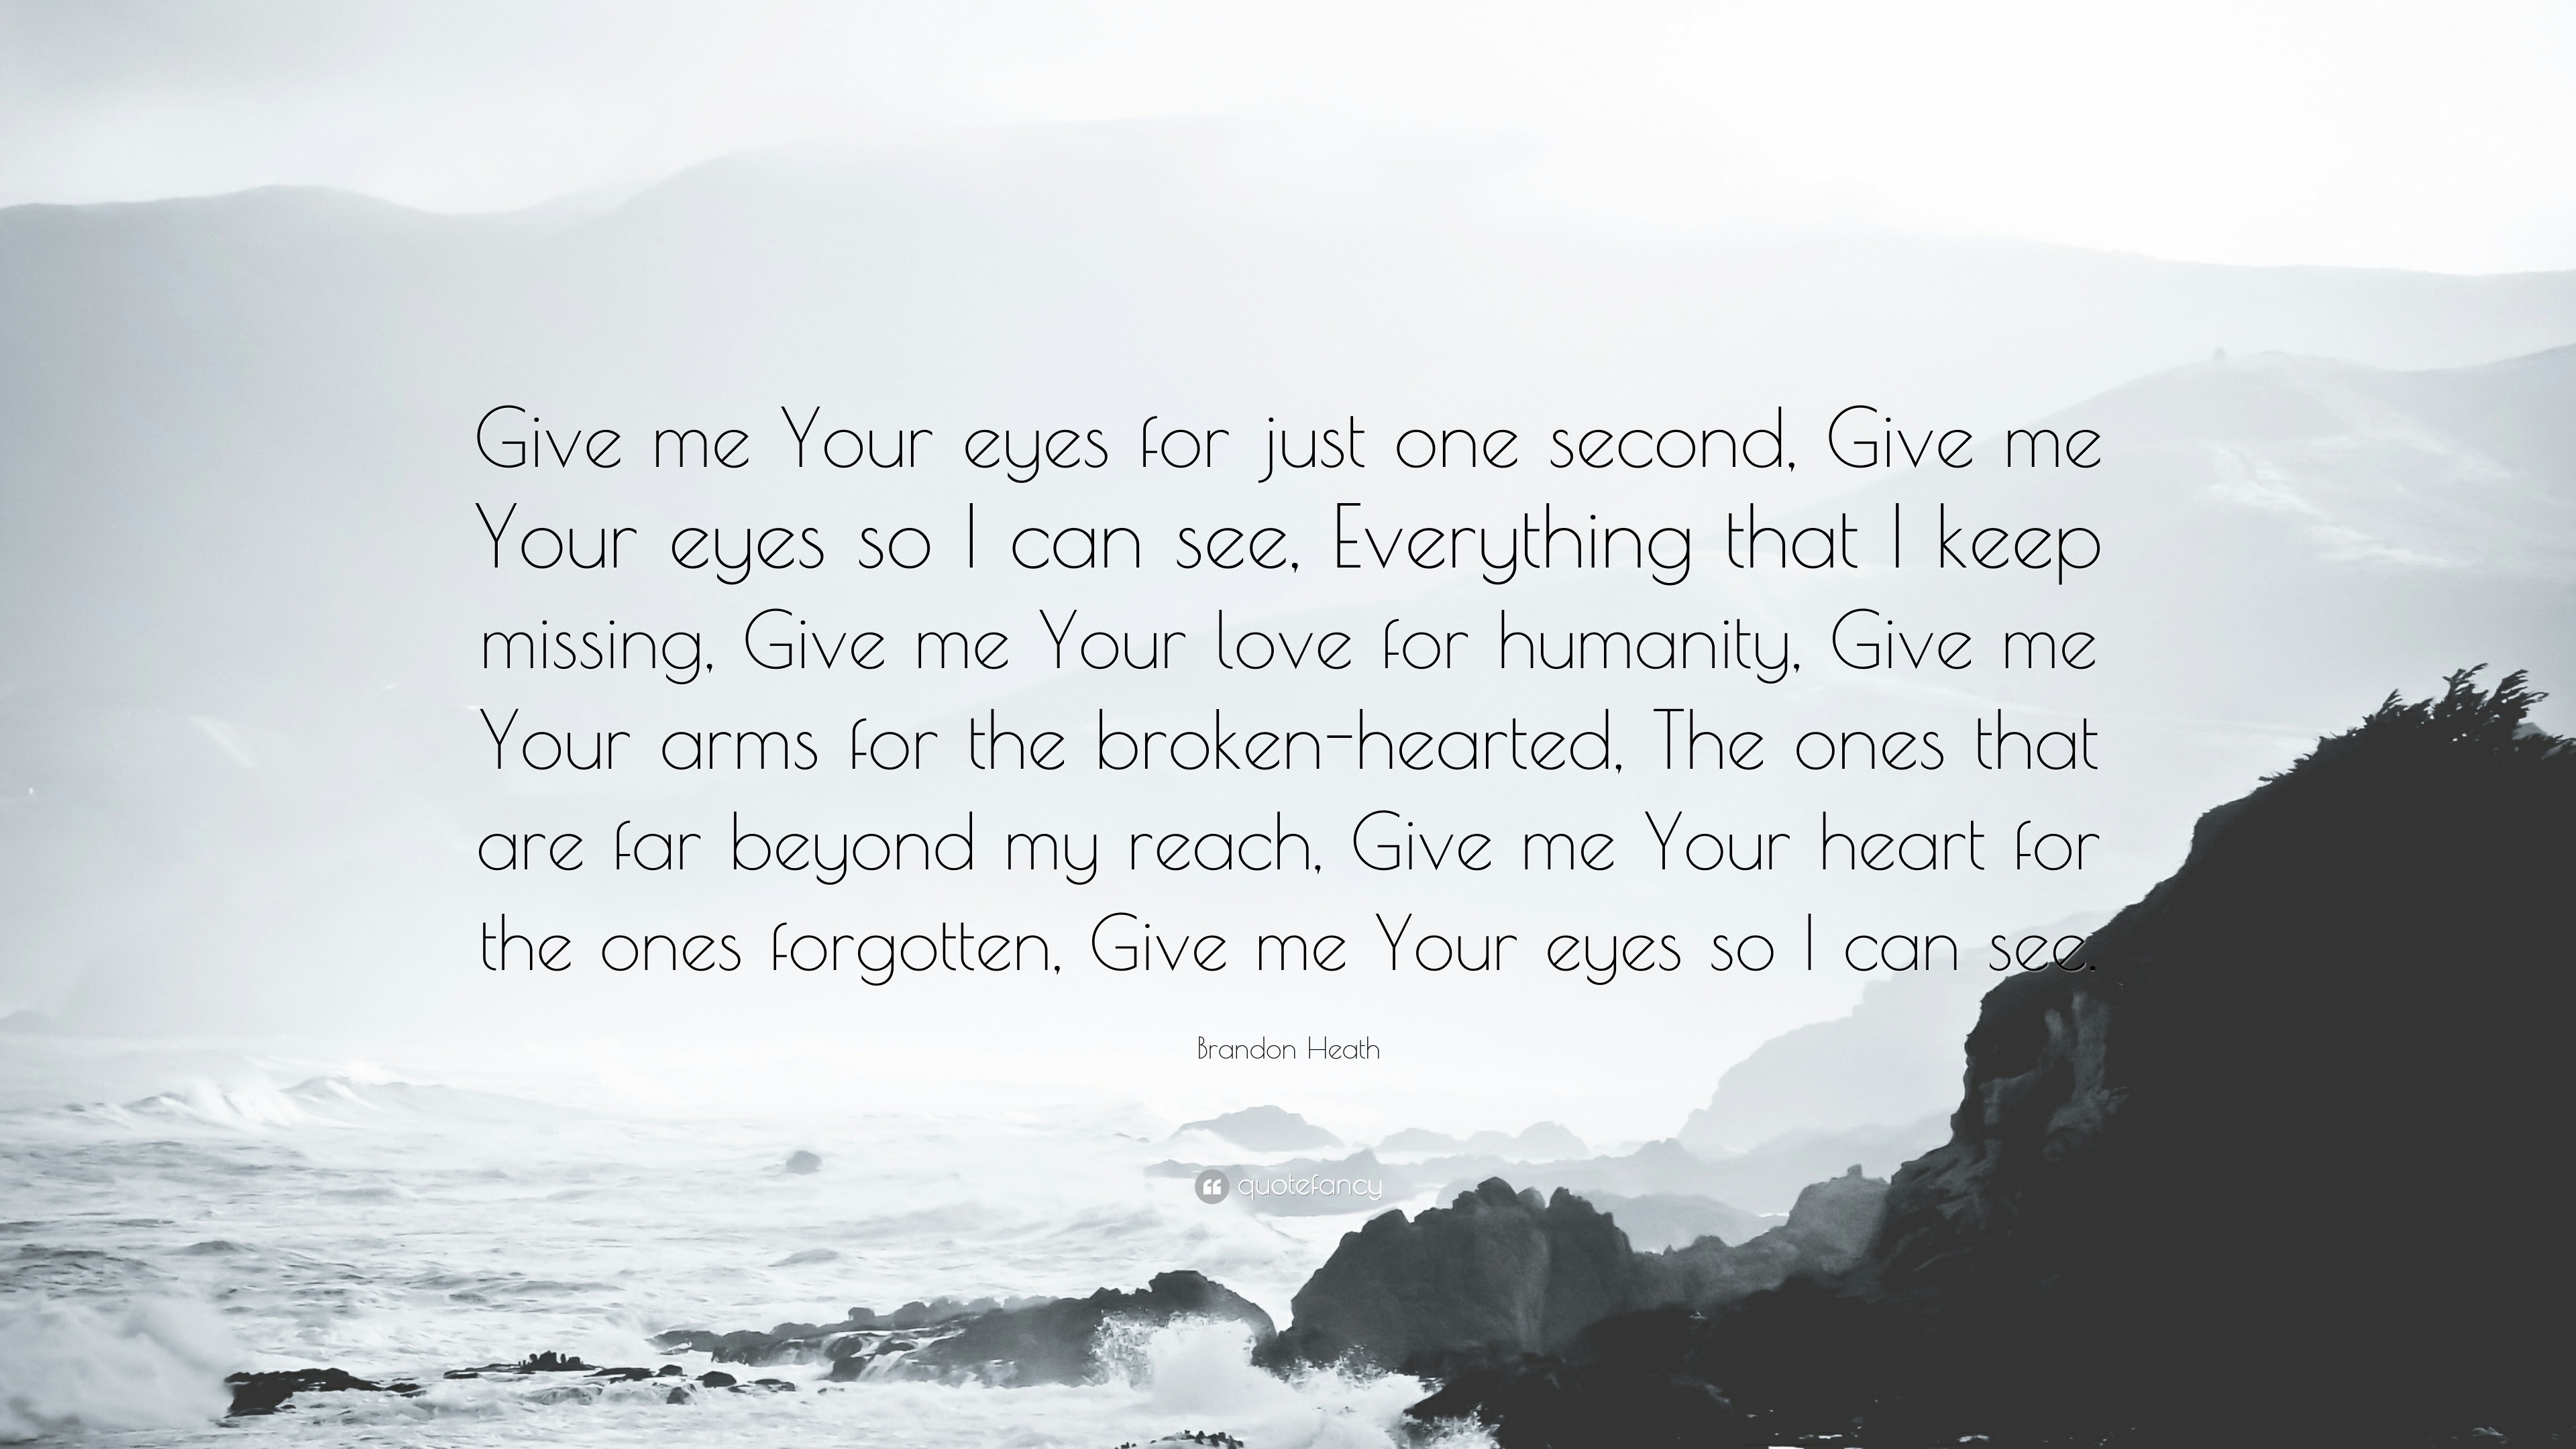 Brandon Heath Quote “Give me Your eyes for just one second Give me